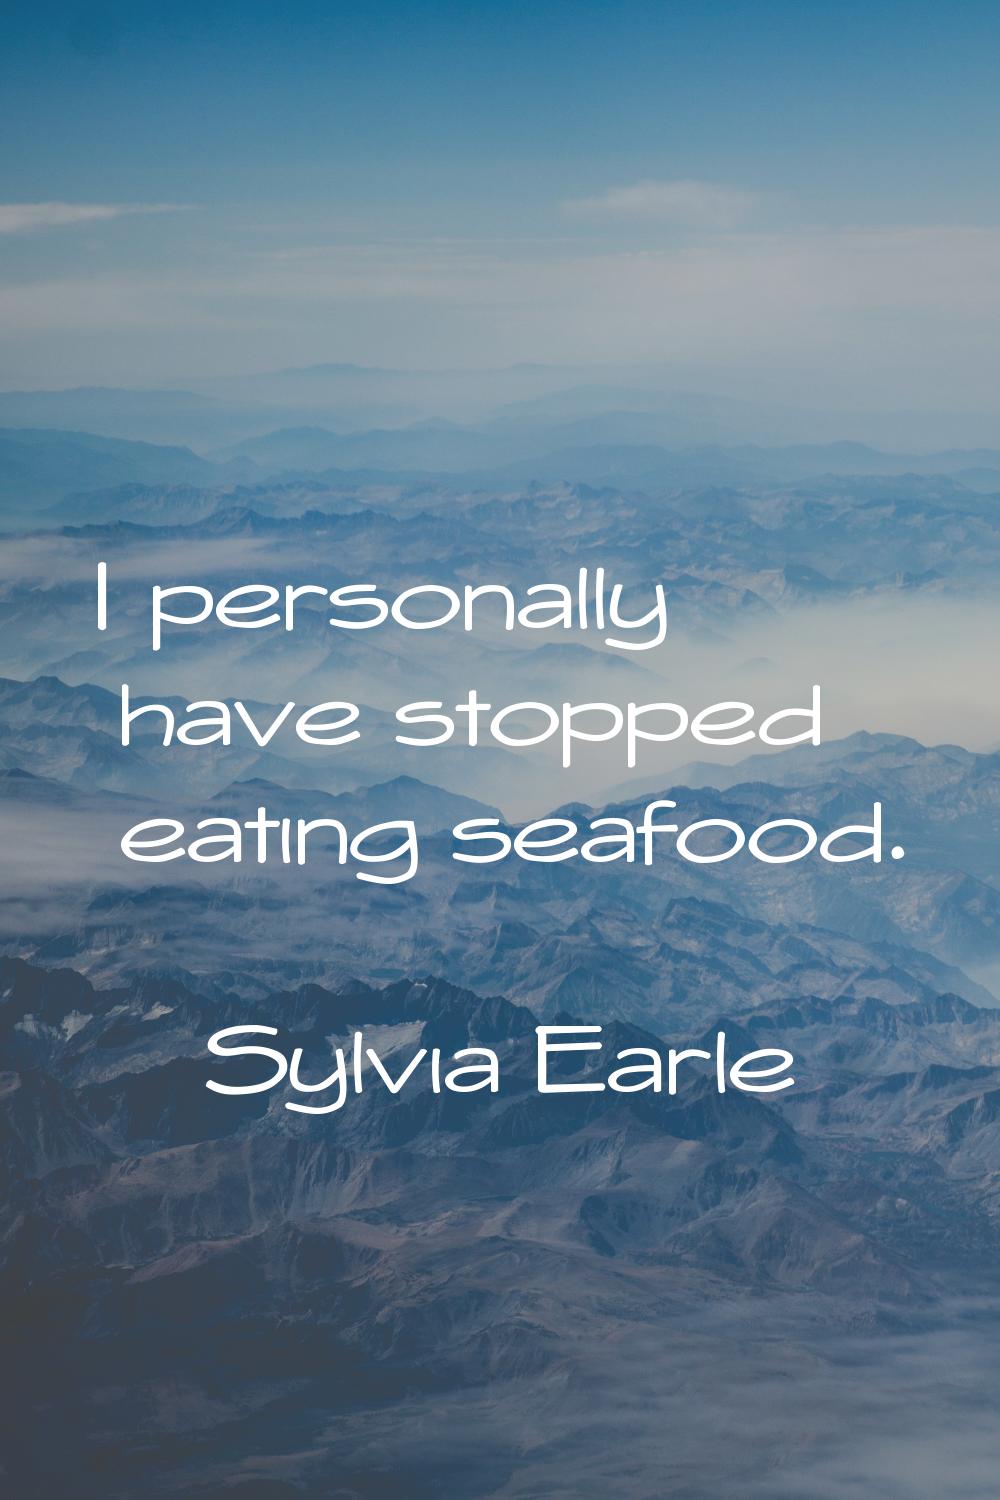 I personally have stopped eating seafood.